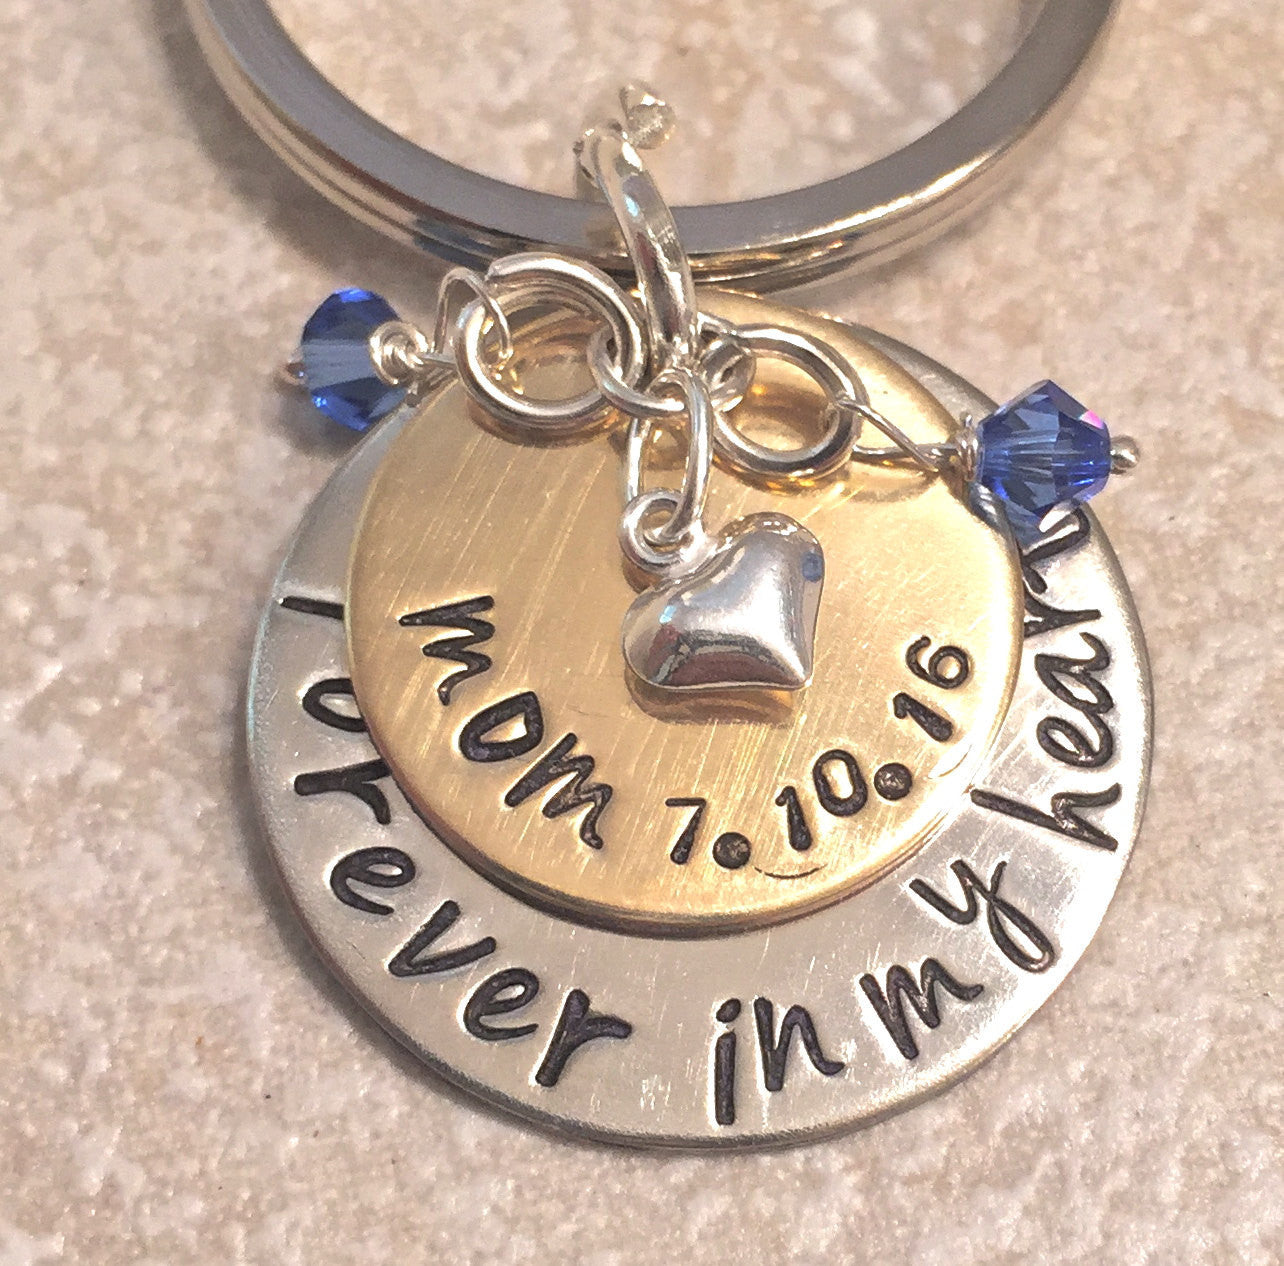 Memorial Keychain, Forever In My Heart, Loss Of Loved One, Loss of Mom, Loss of Dad, Memorial Gift, natashaaloha - Natashaaloha, jewelry, bracelets, necklace, keychains, fishing lures, gifts for men, charms, personalized, 